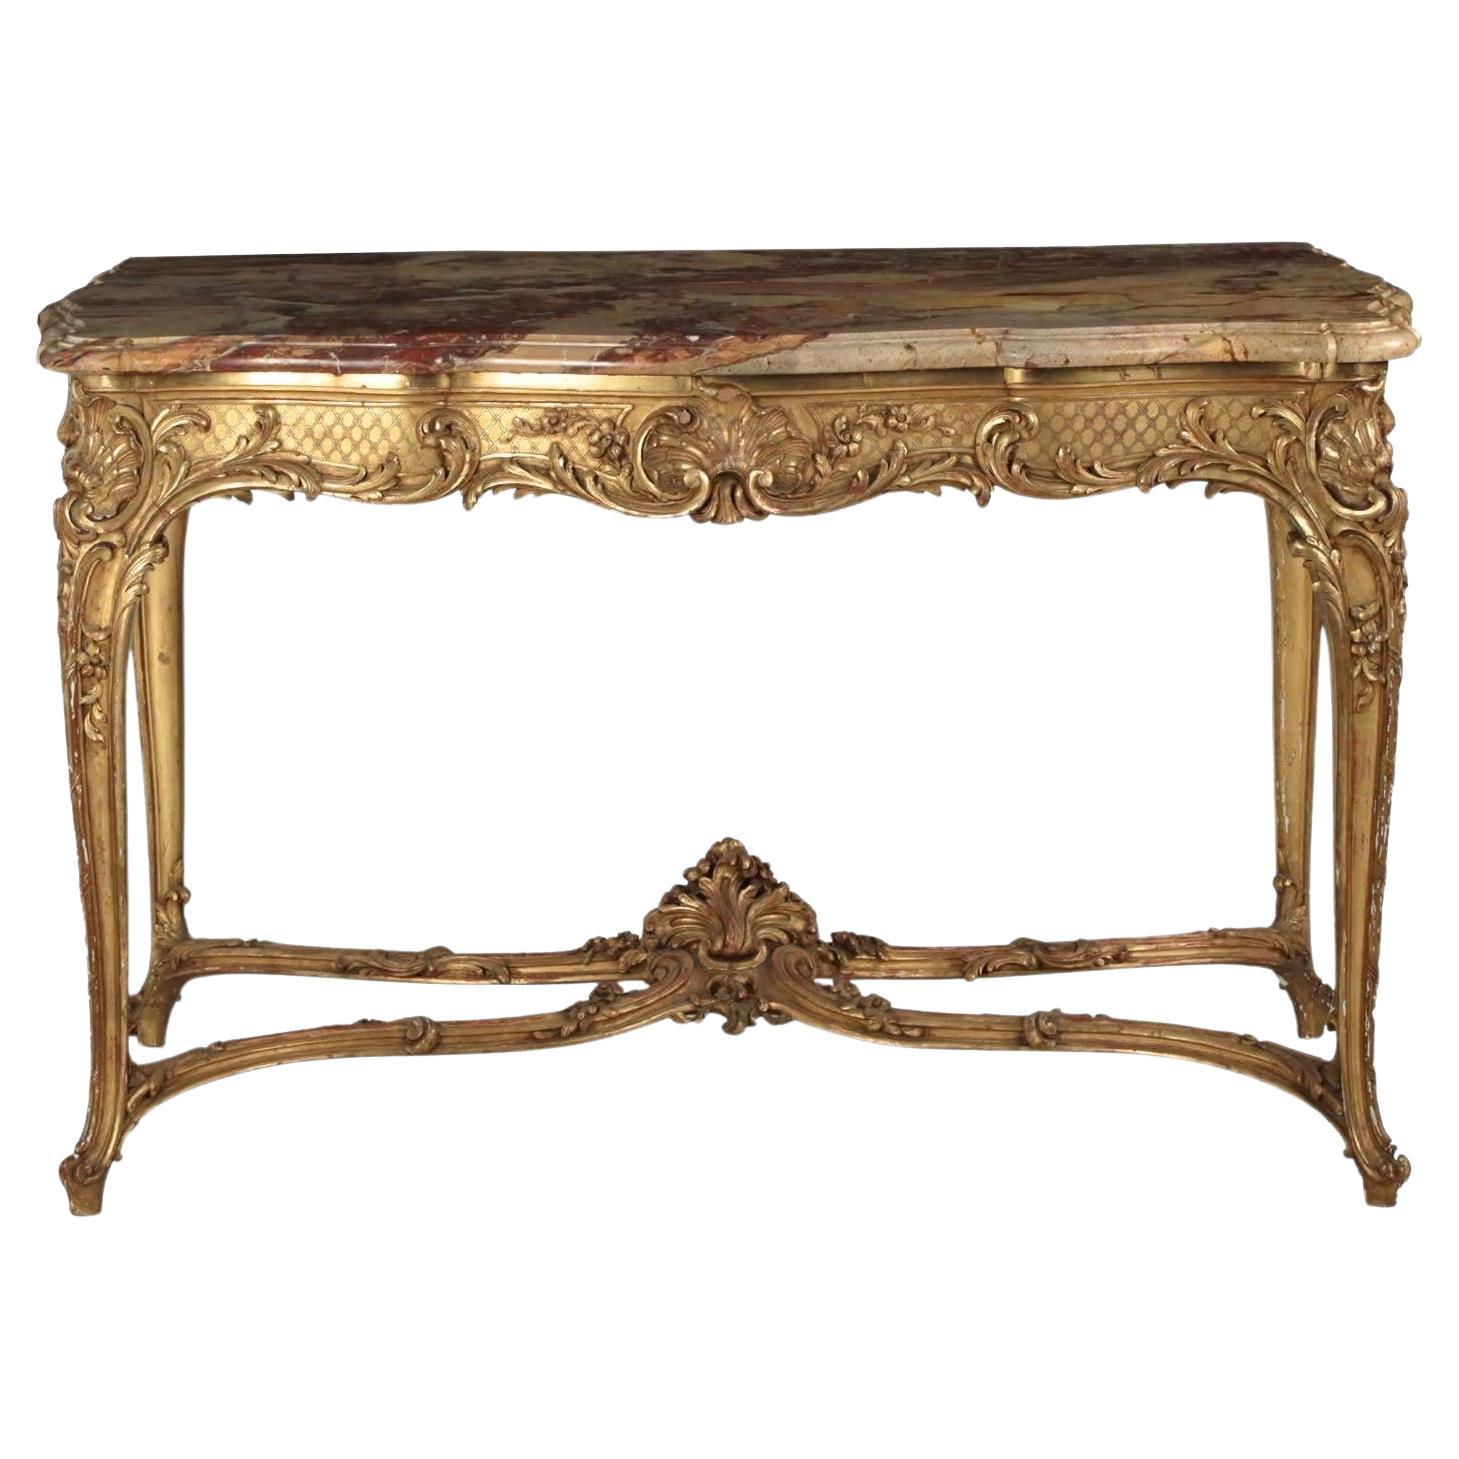 French Louis XV Style Marble-Top, Giltwood Center Table, Paris, circa 1880